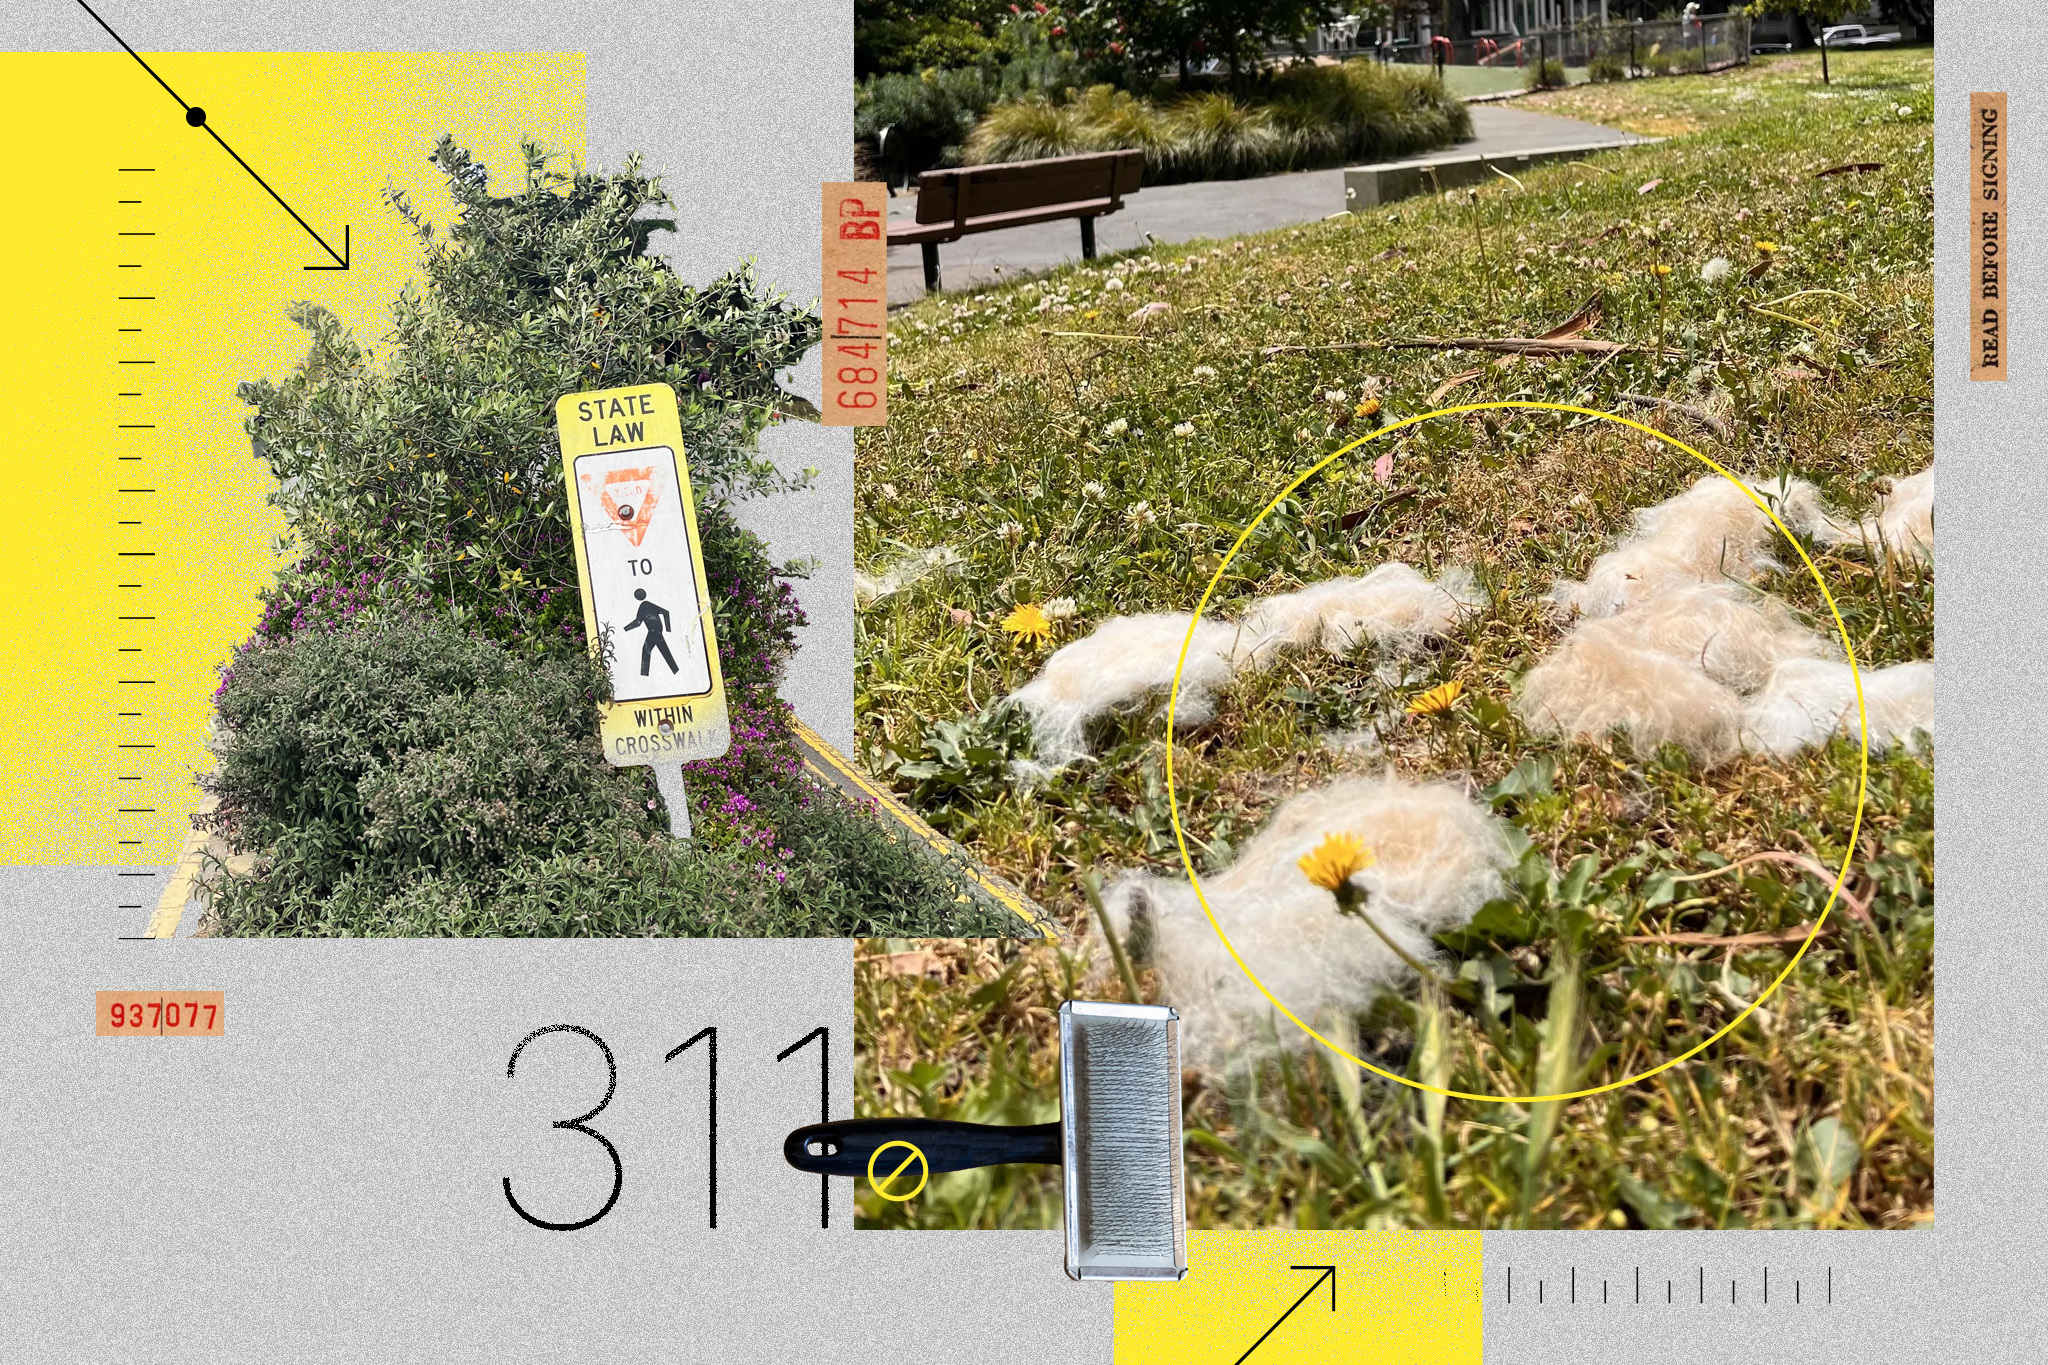 The image shows a park with a "State Law Yield to Pedestrians Within Crosswalk" sign and patches of fuzzy white animal fur on the grass.